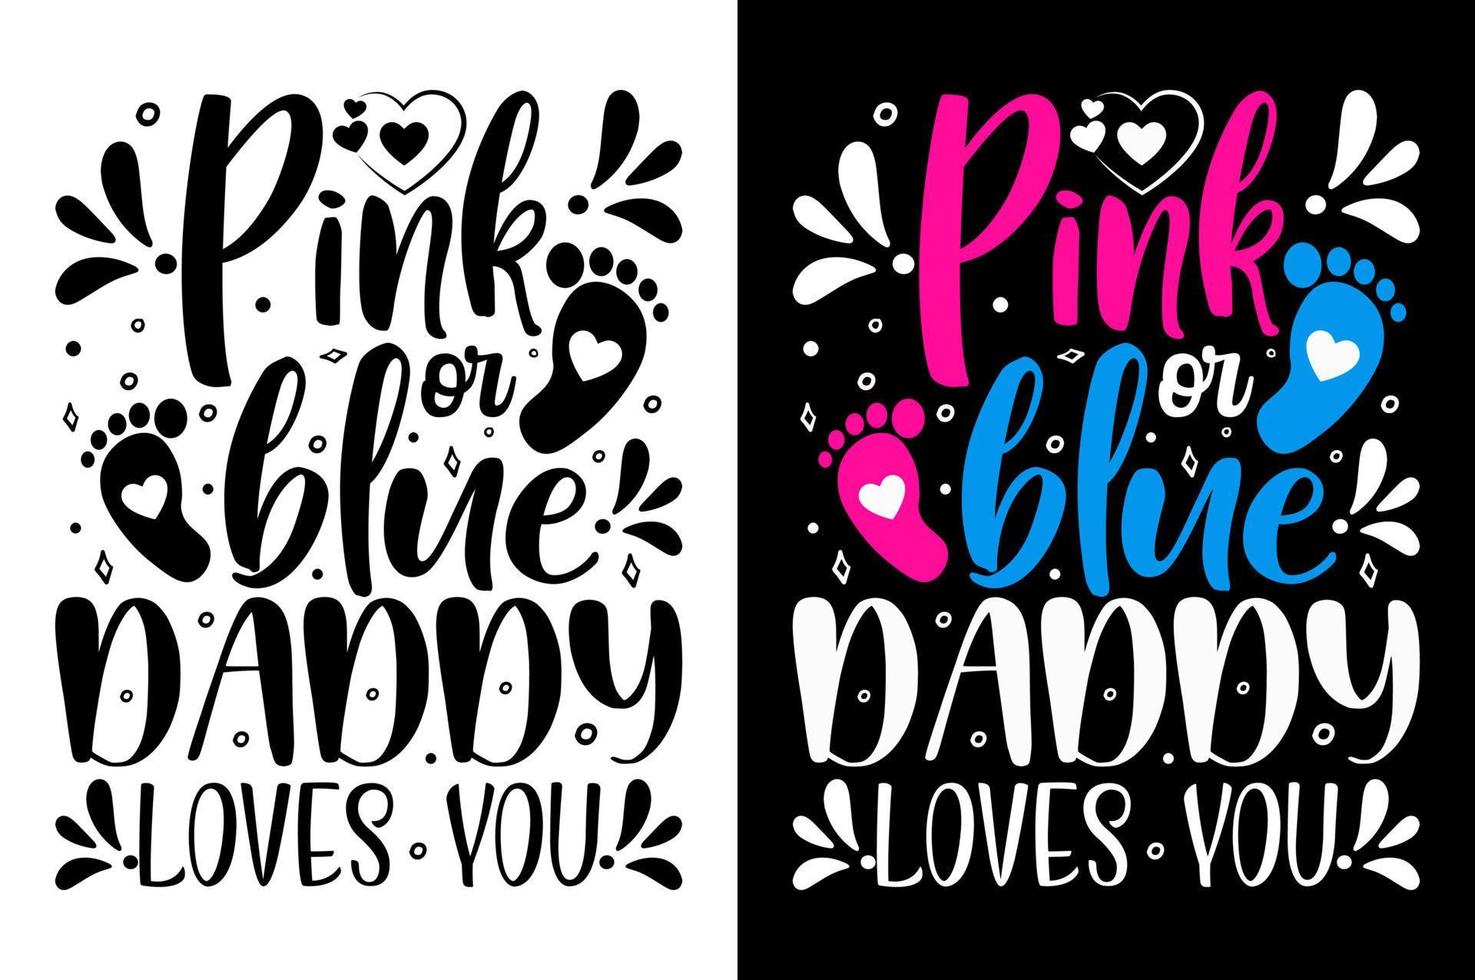 Pink Or Blue Daddy Loves You T Shirt Gender Reveal Baby TShirt inspirational quotes typography lettering design vector